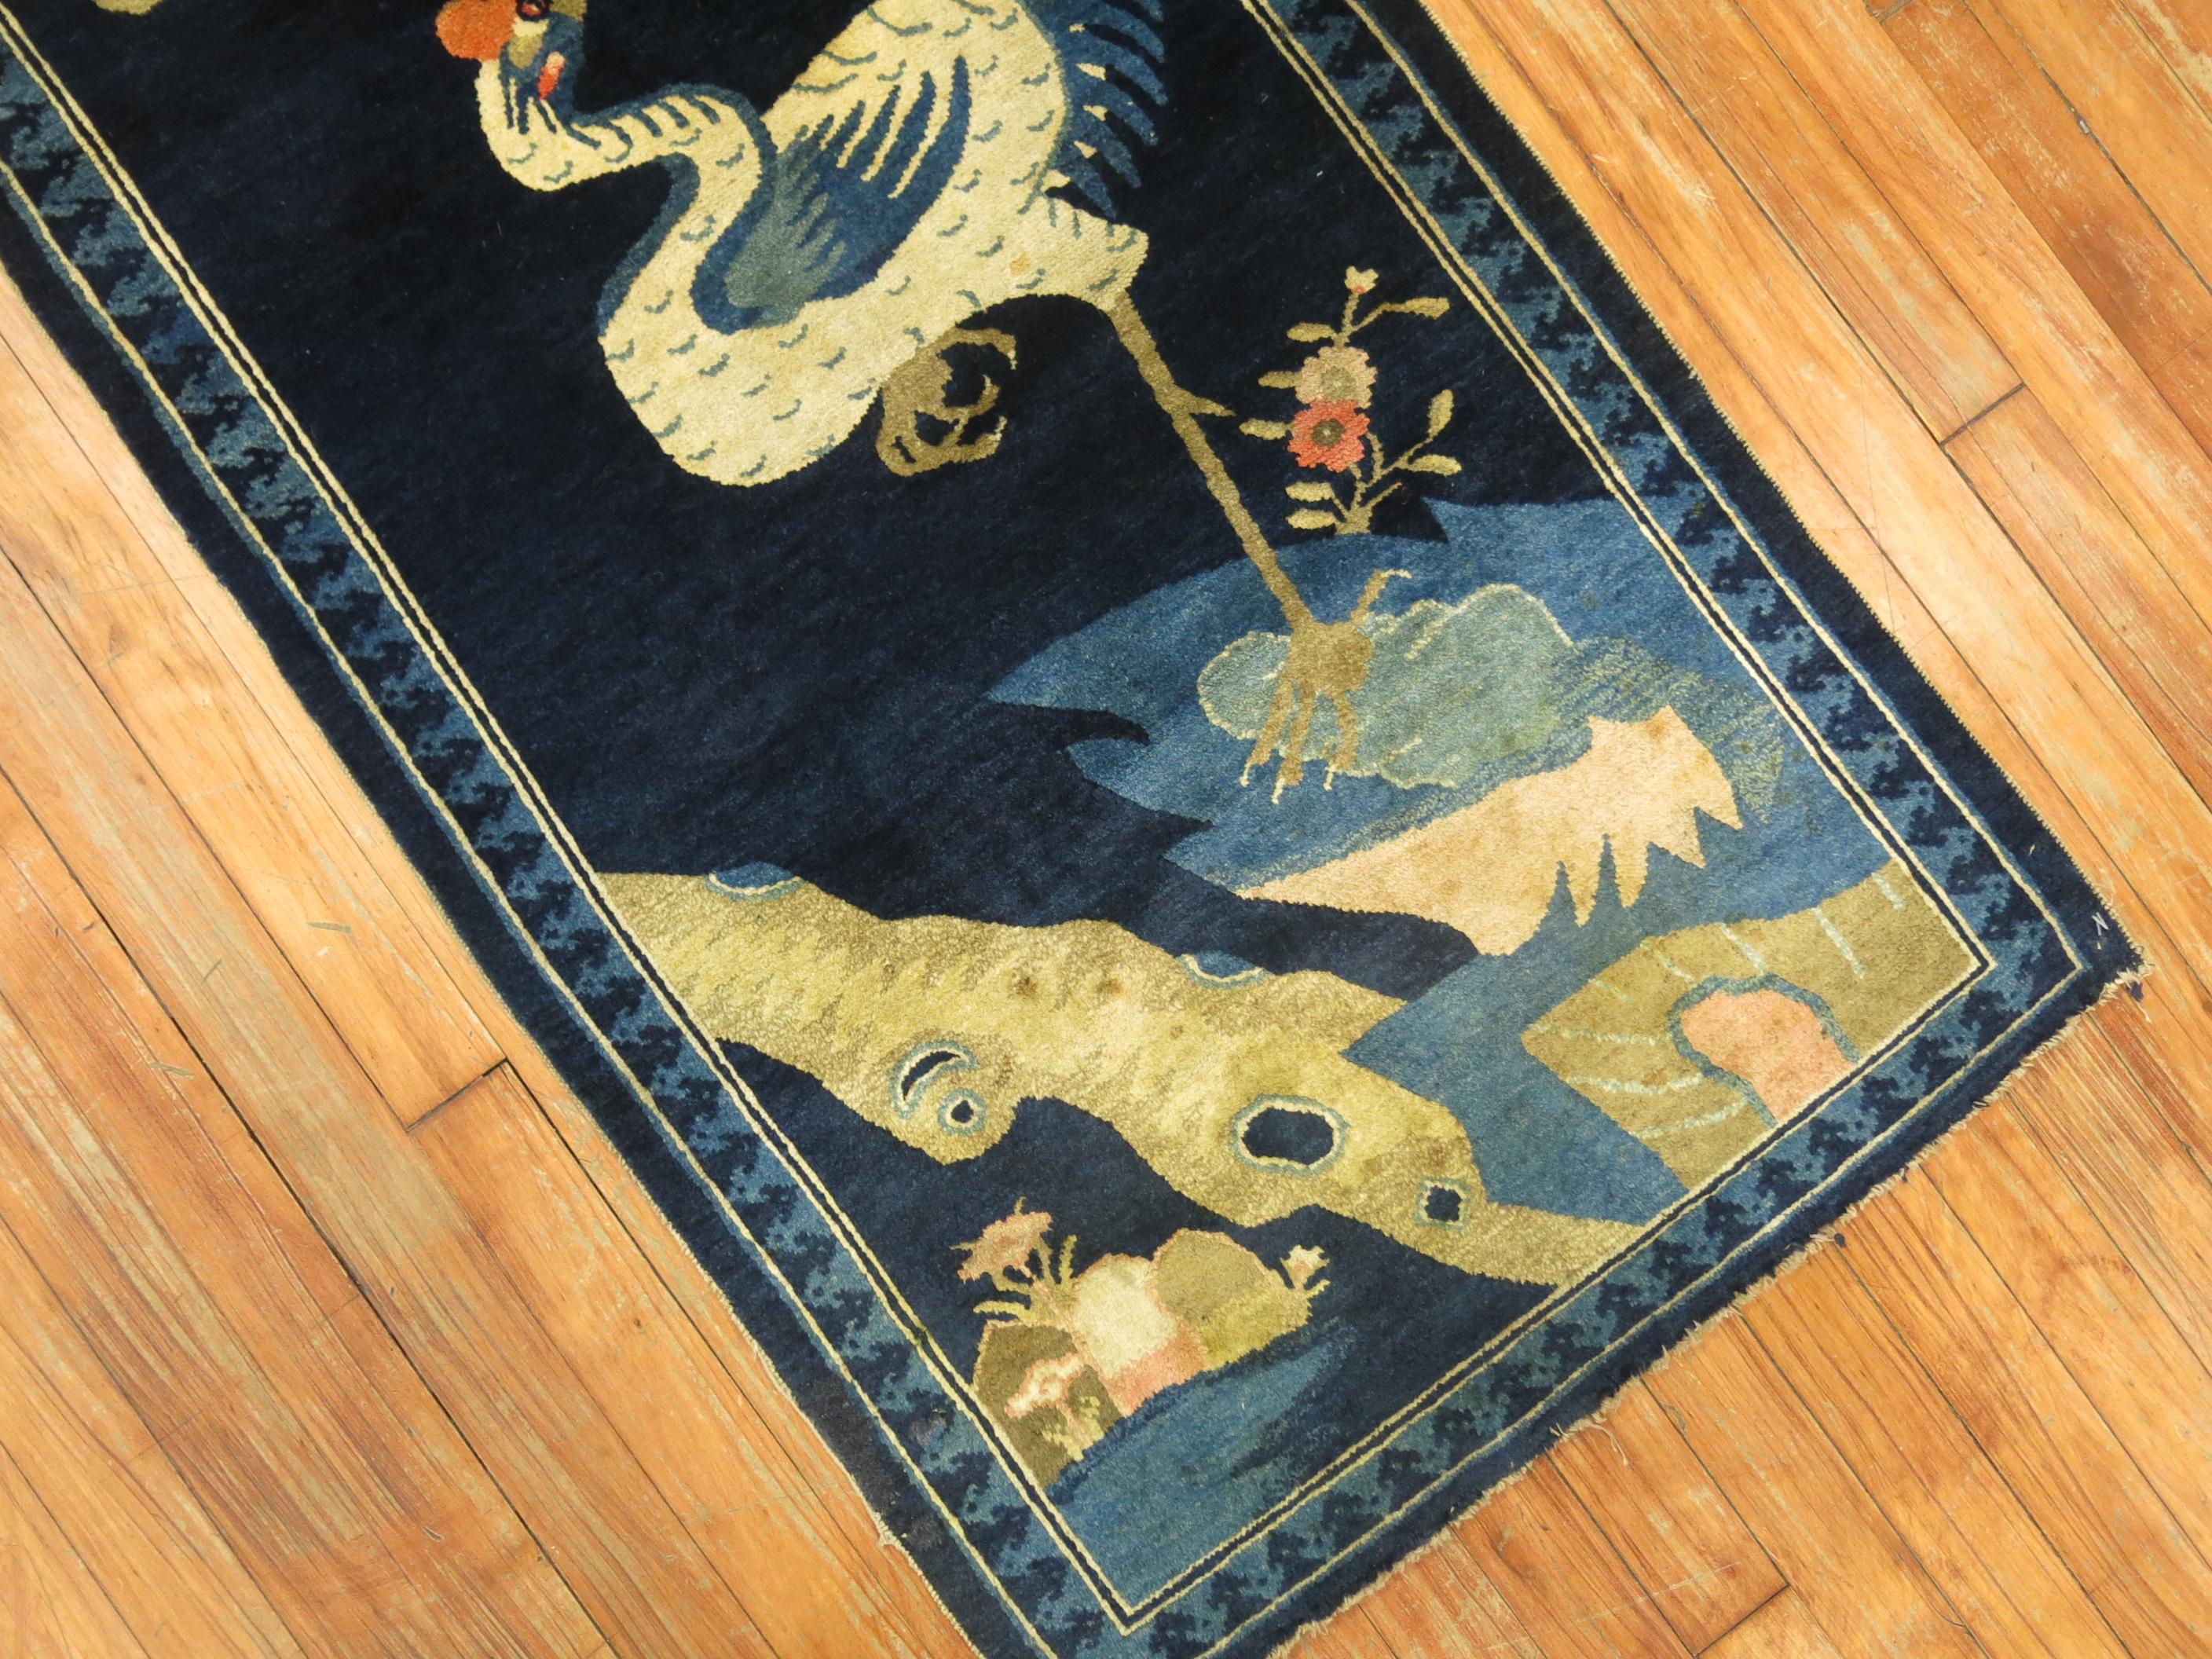 An early 20th century Chinese rug featuring a large ostrich on a deep midnight blue ground. The quality on this is quite Fine and has a medium pile throughout.